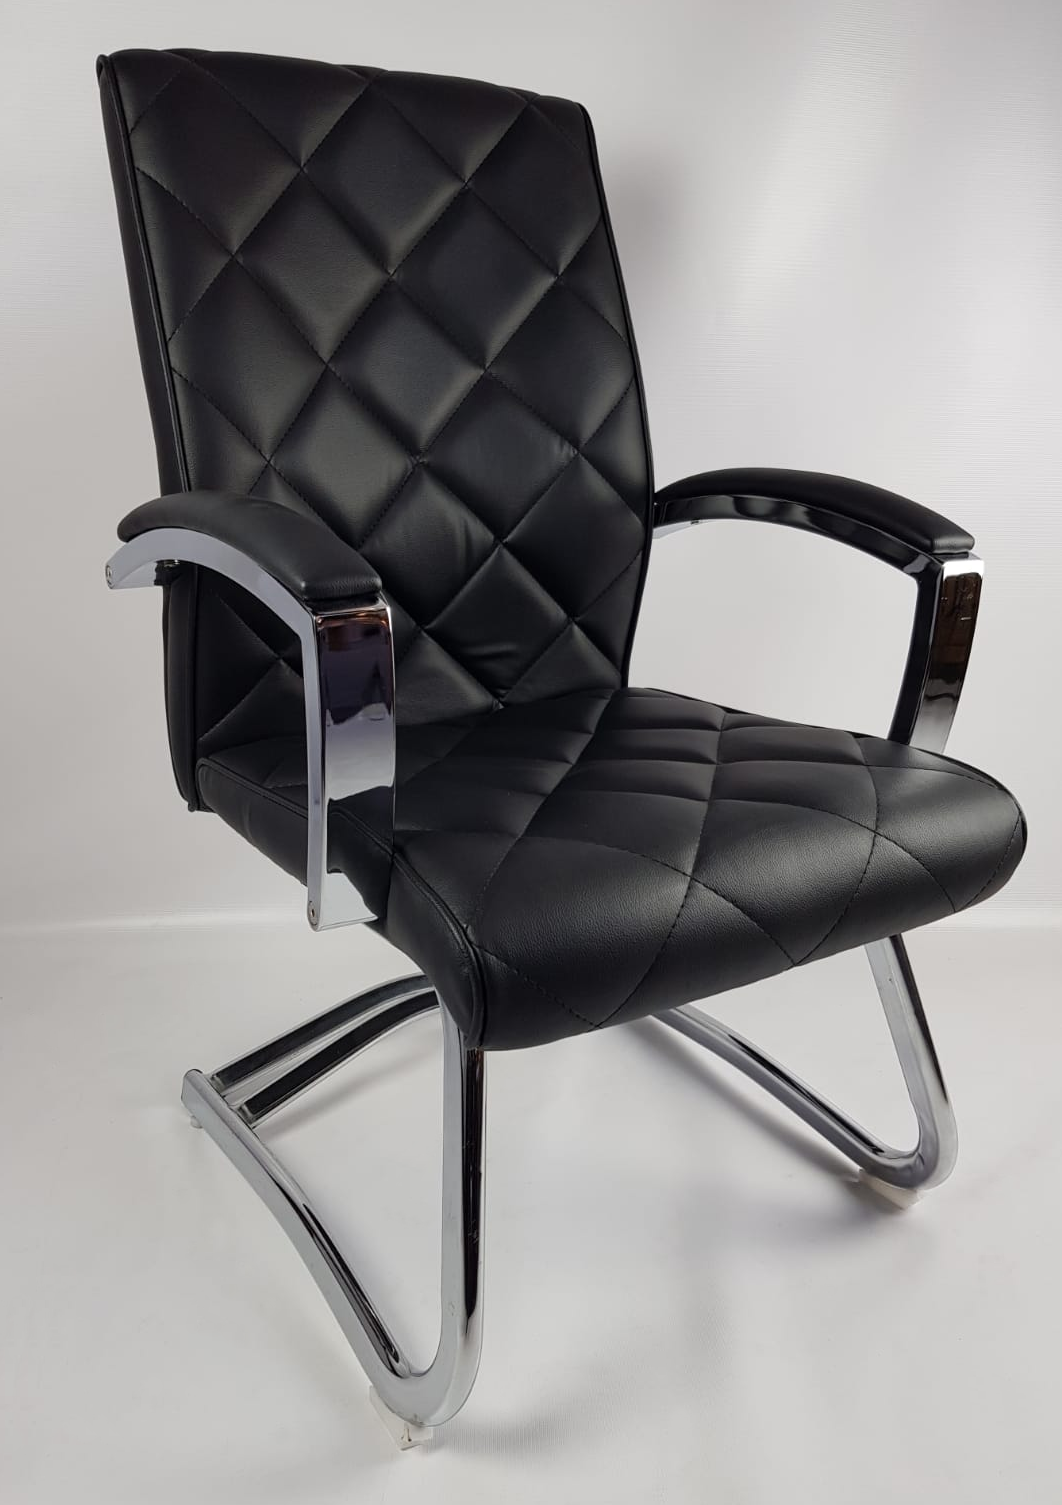 Quilted Black Leather Stylish Cantilever Visitors Chair - ZV-B217 North Yorkshire